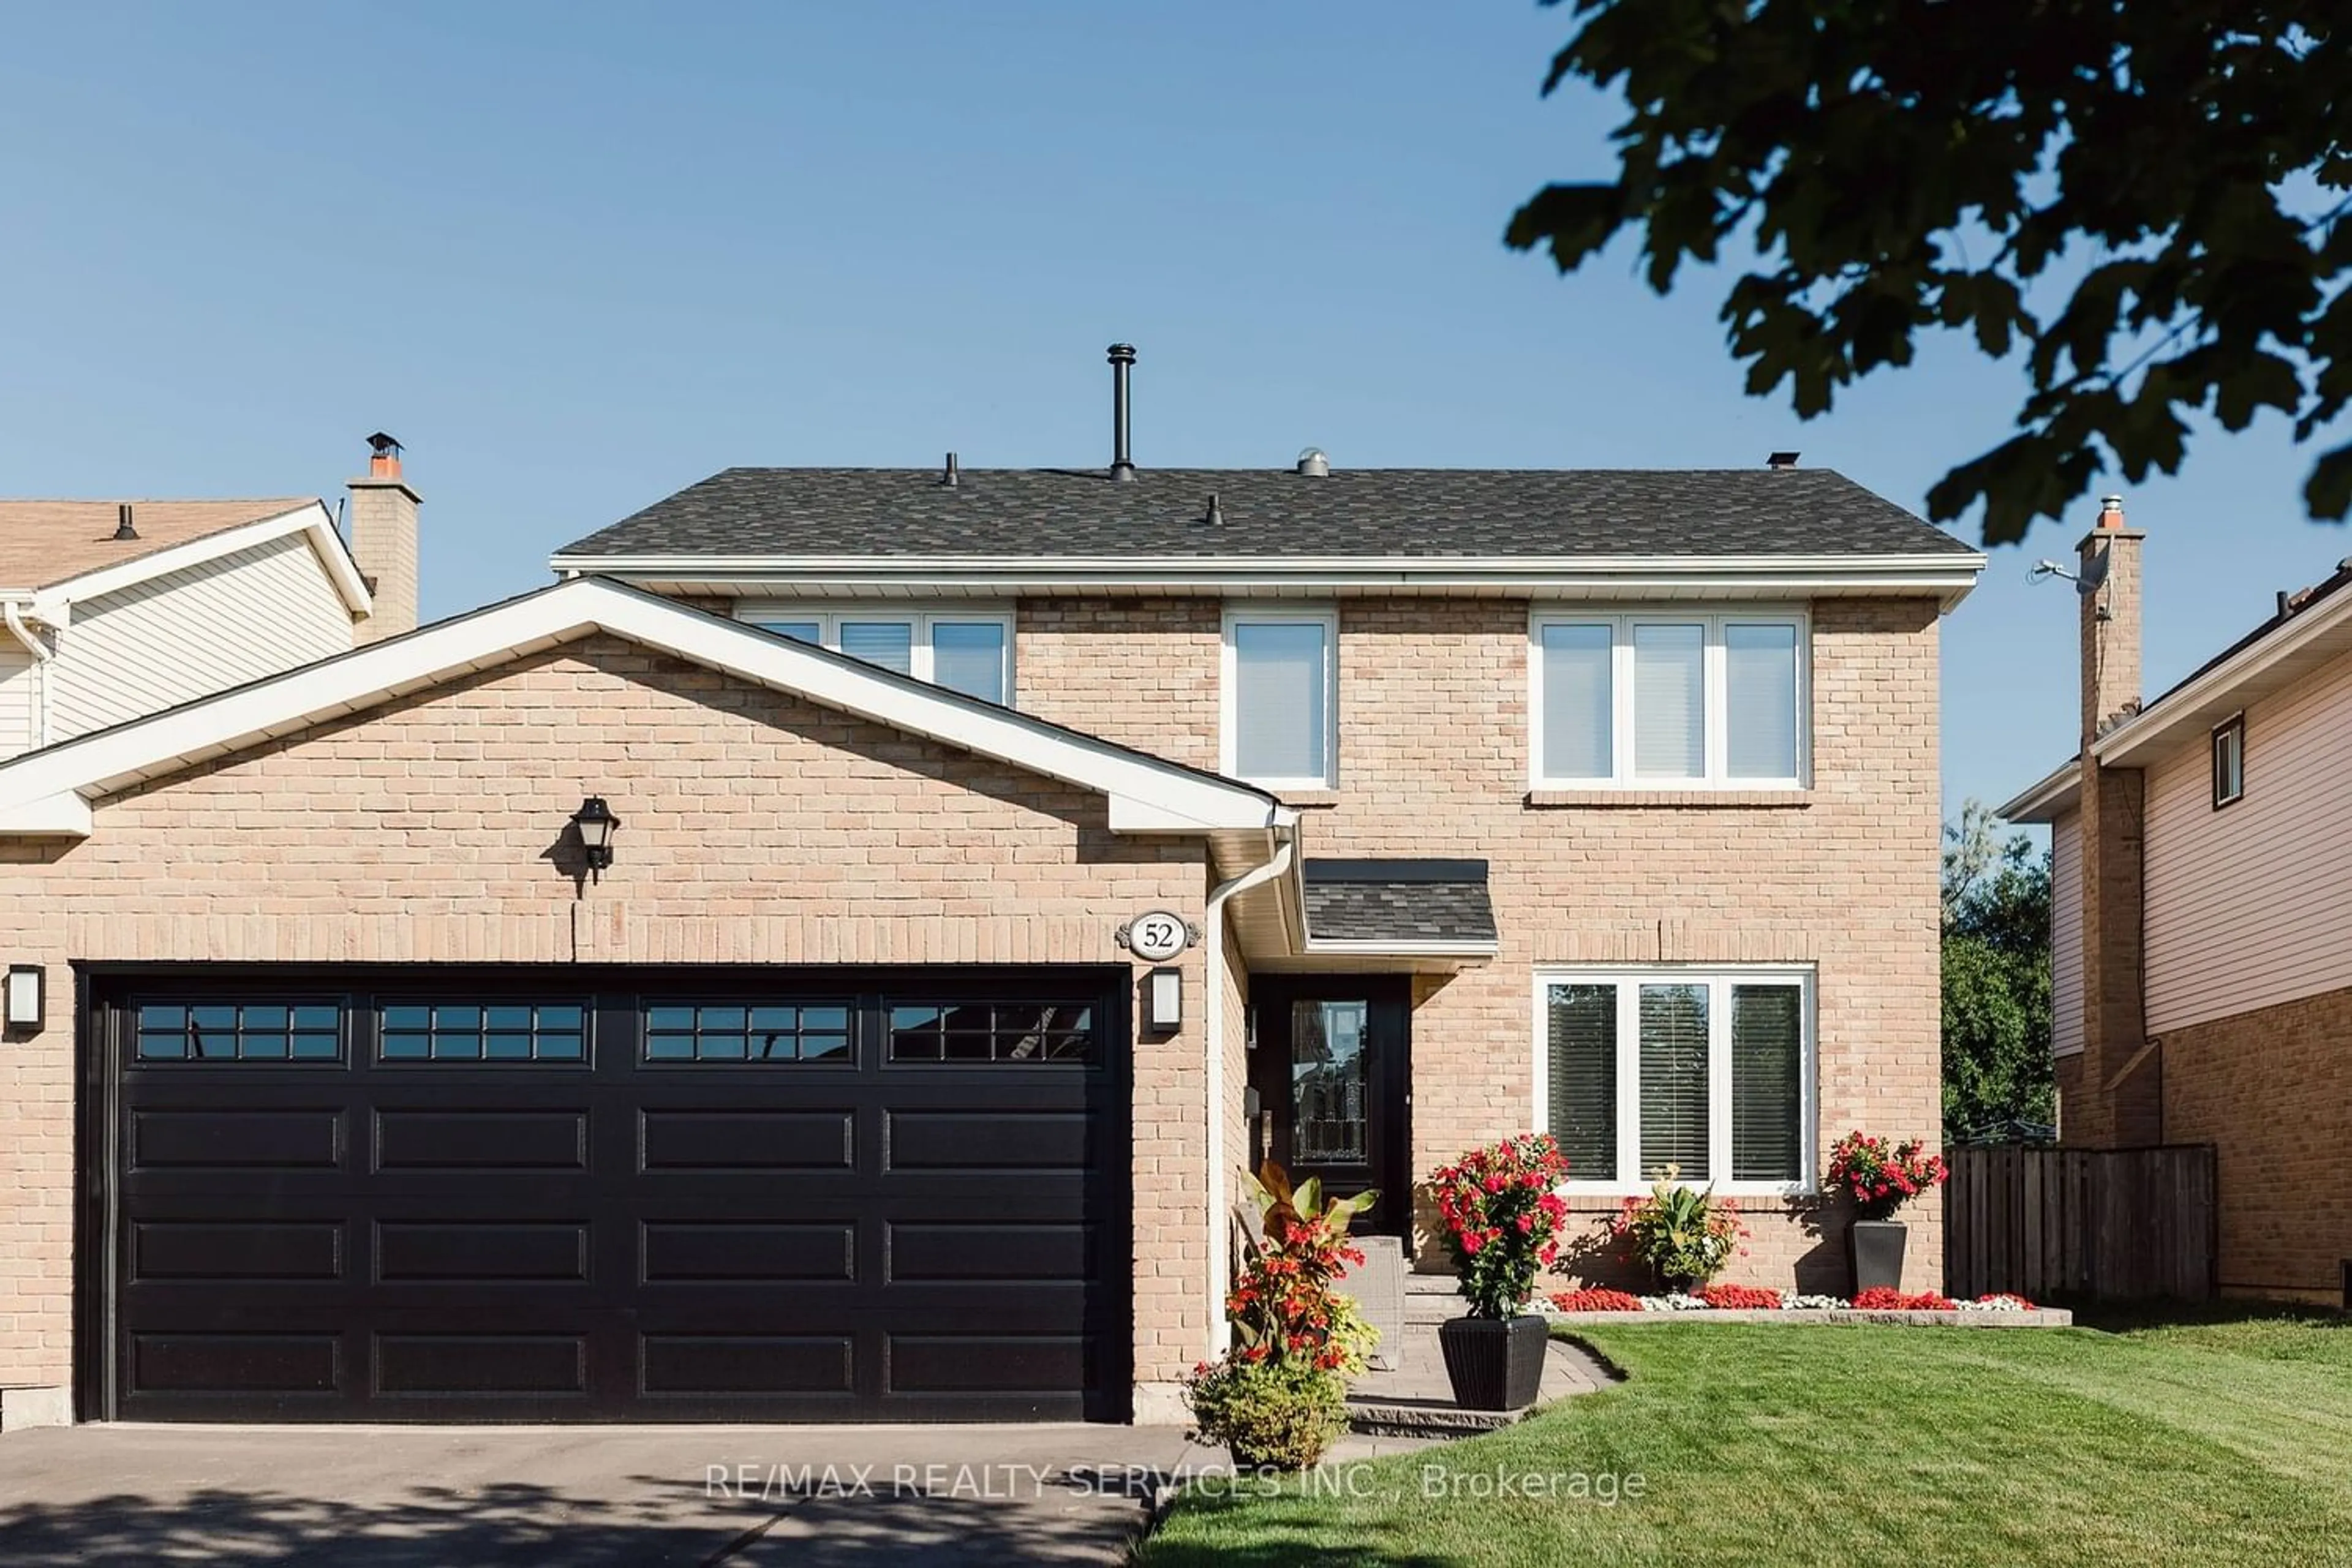 Home with brick exterior material for 52 Northampton St, Brampton Ontario L6S 3Y7